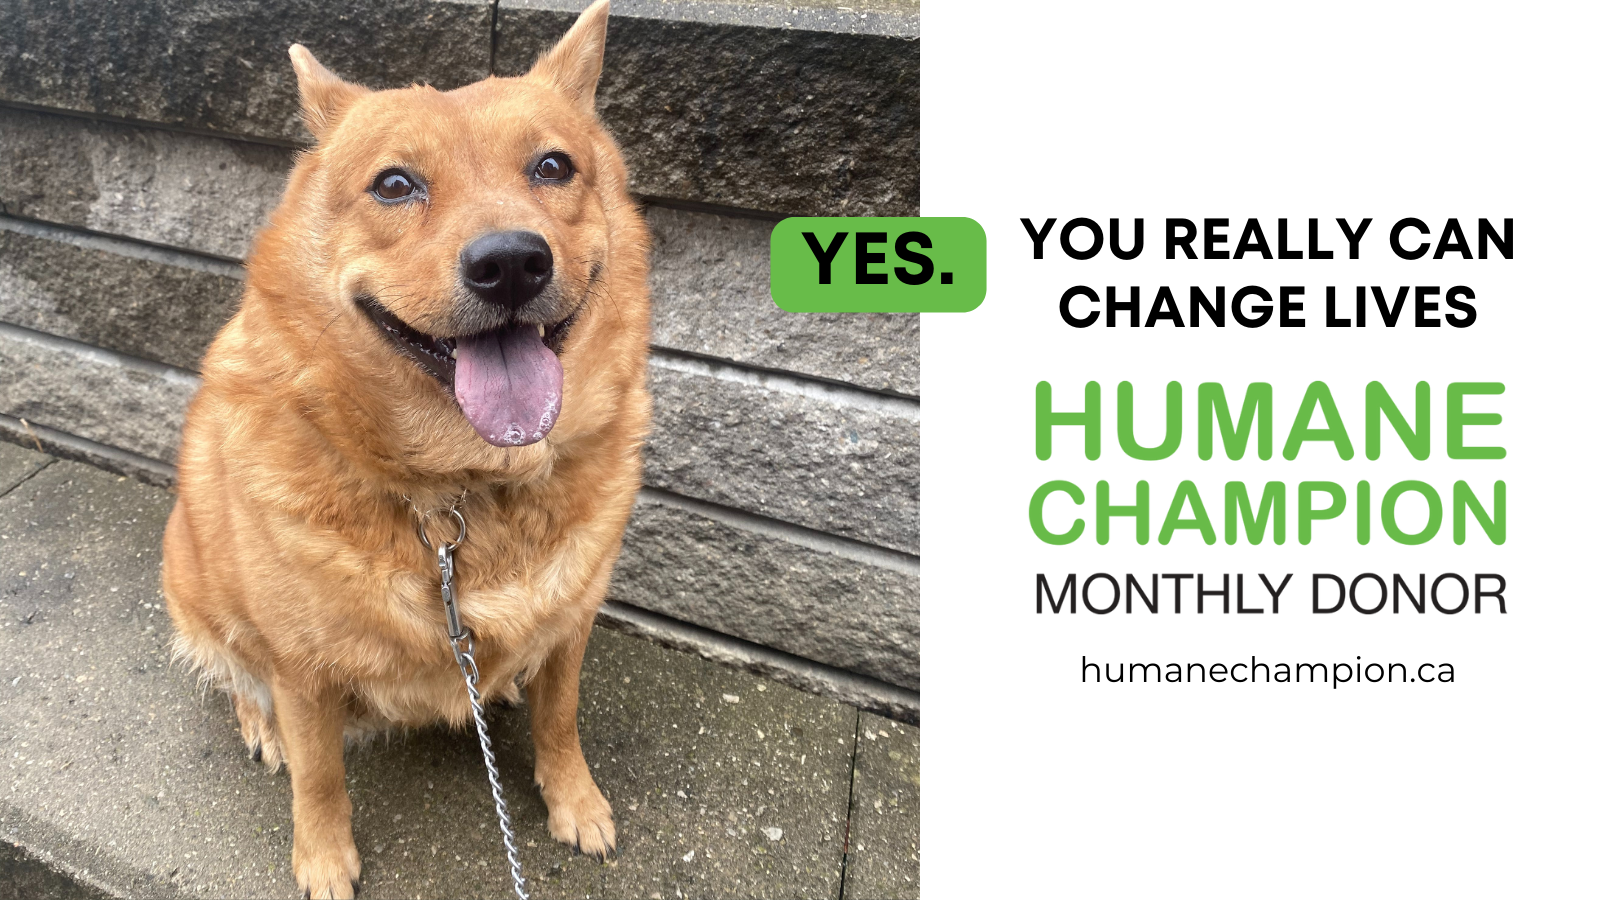 A successful story from our Humane Champion program